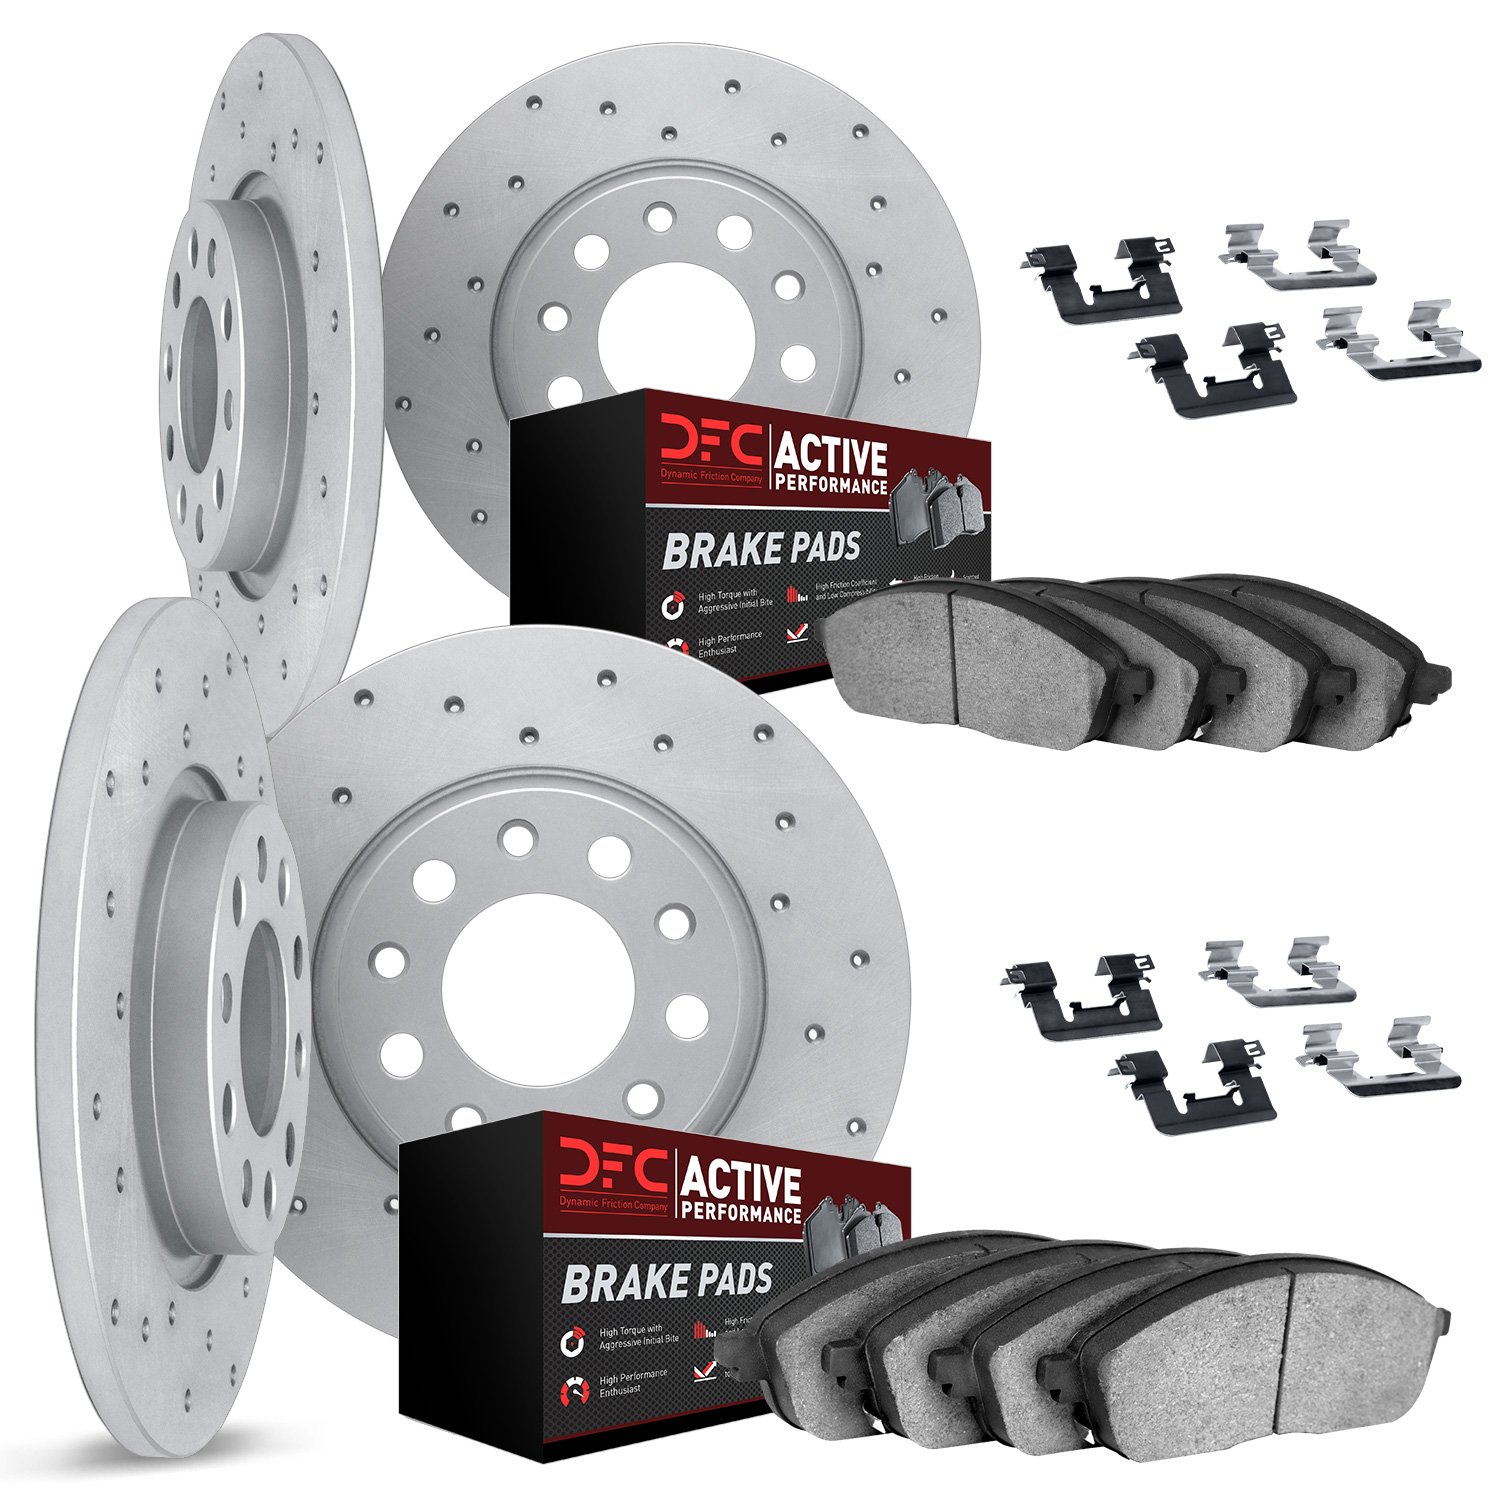 Geoperformance Drilled Brake Rotors with Active Performance Pads